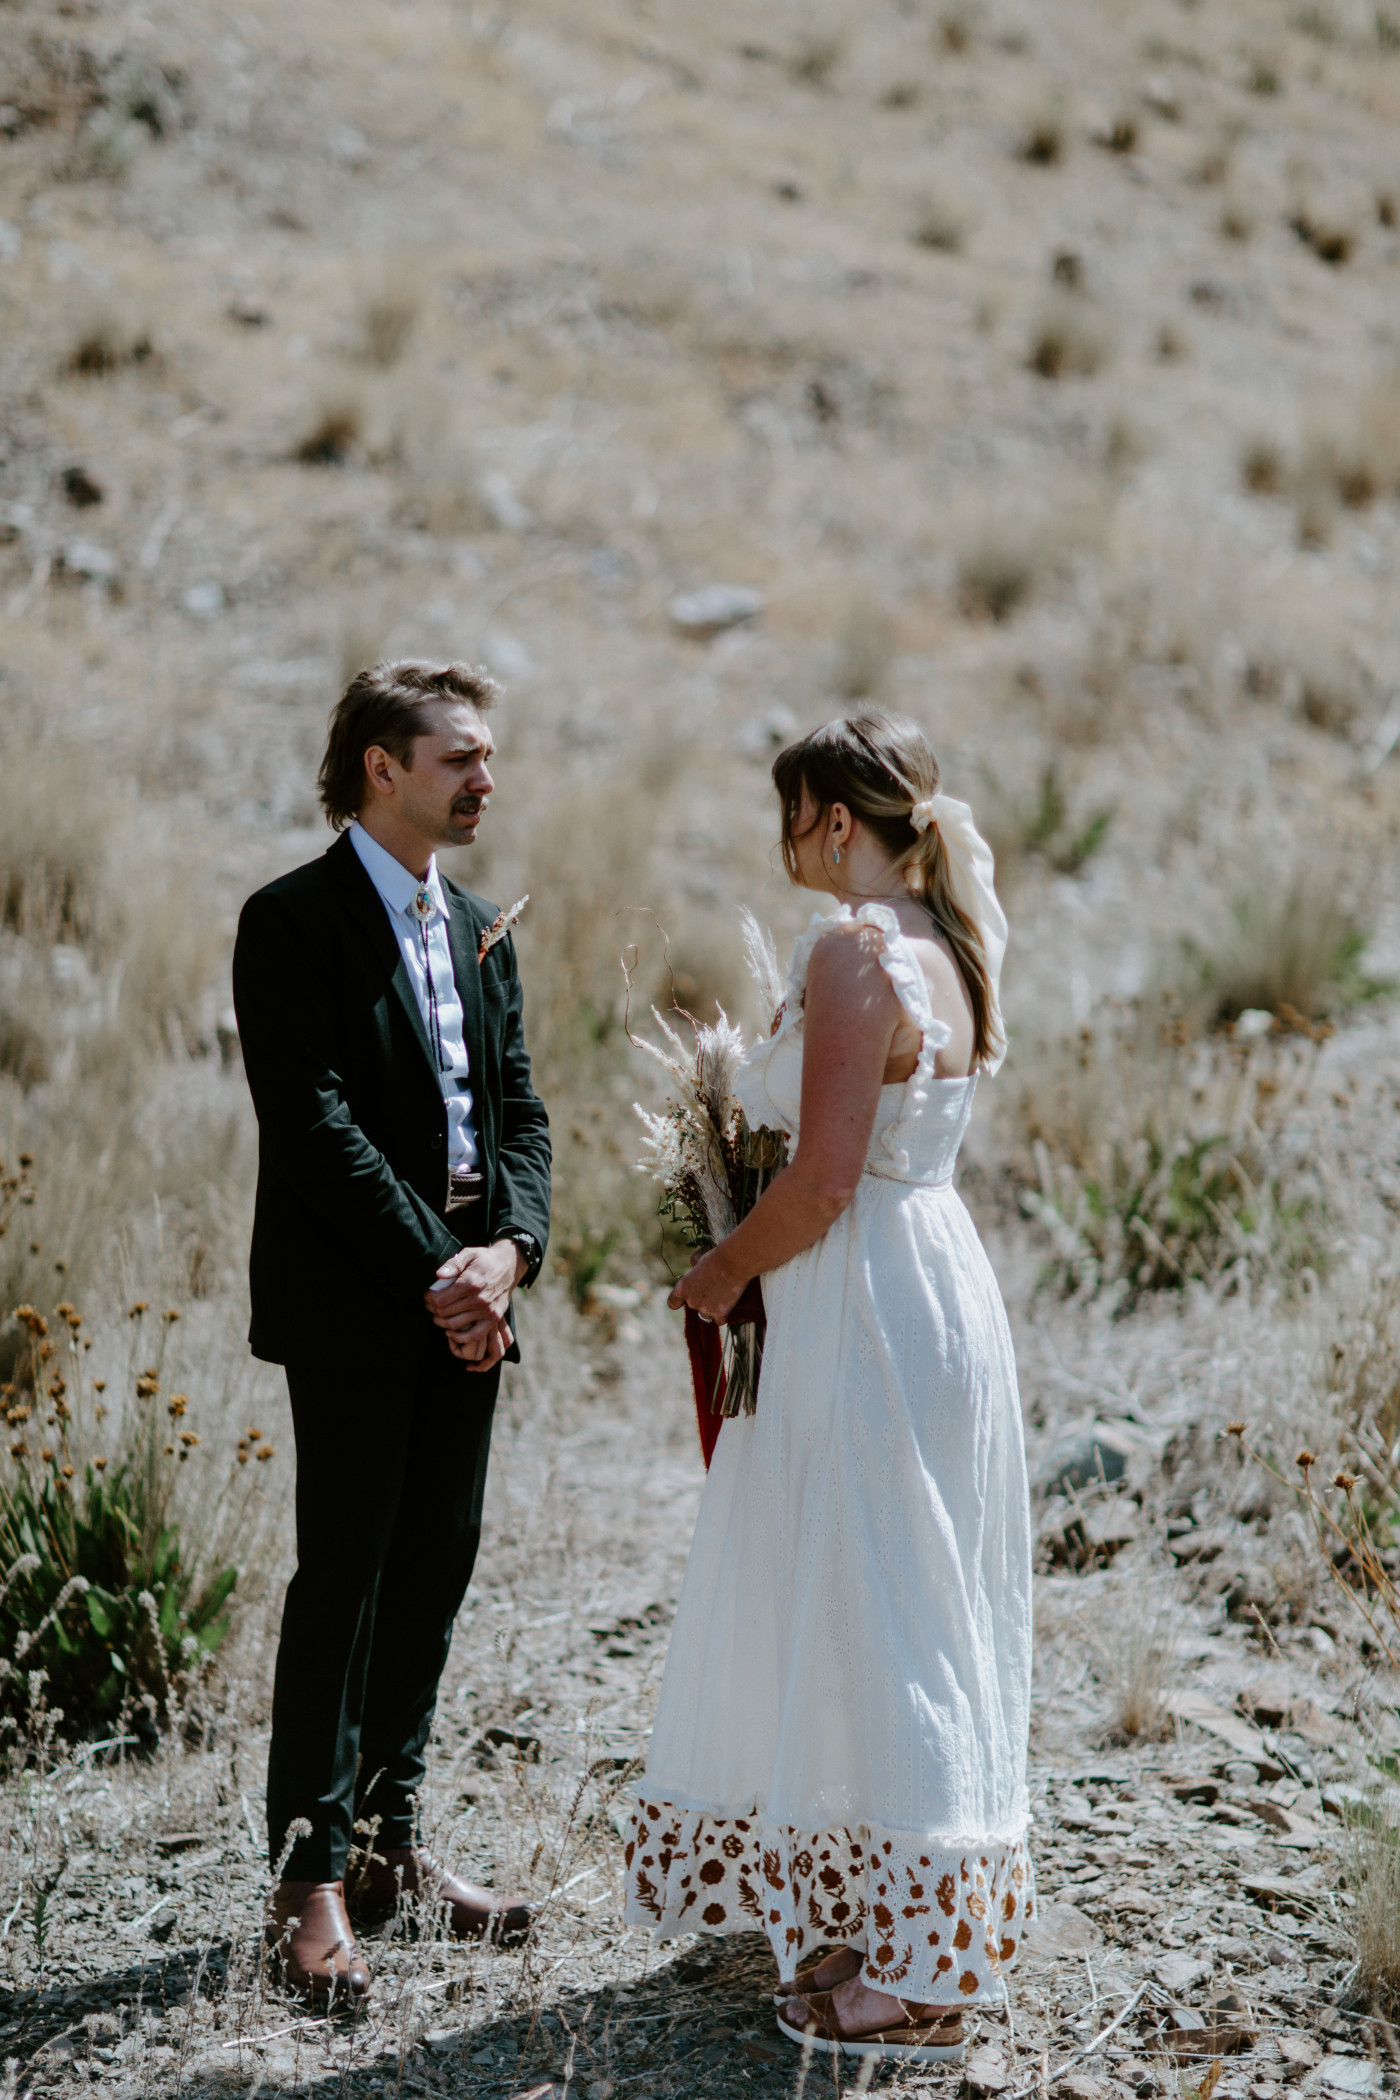 Emily and Greyson stand together. Elopement photography in the Central Oregon desert by Sienna Plus Josh.